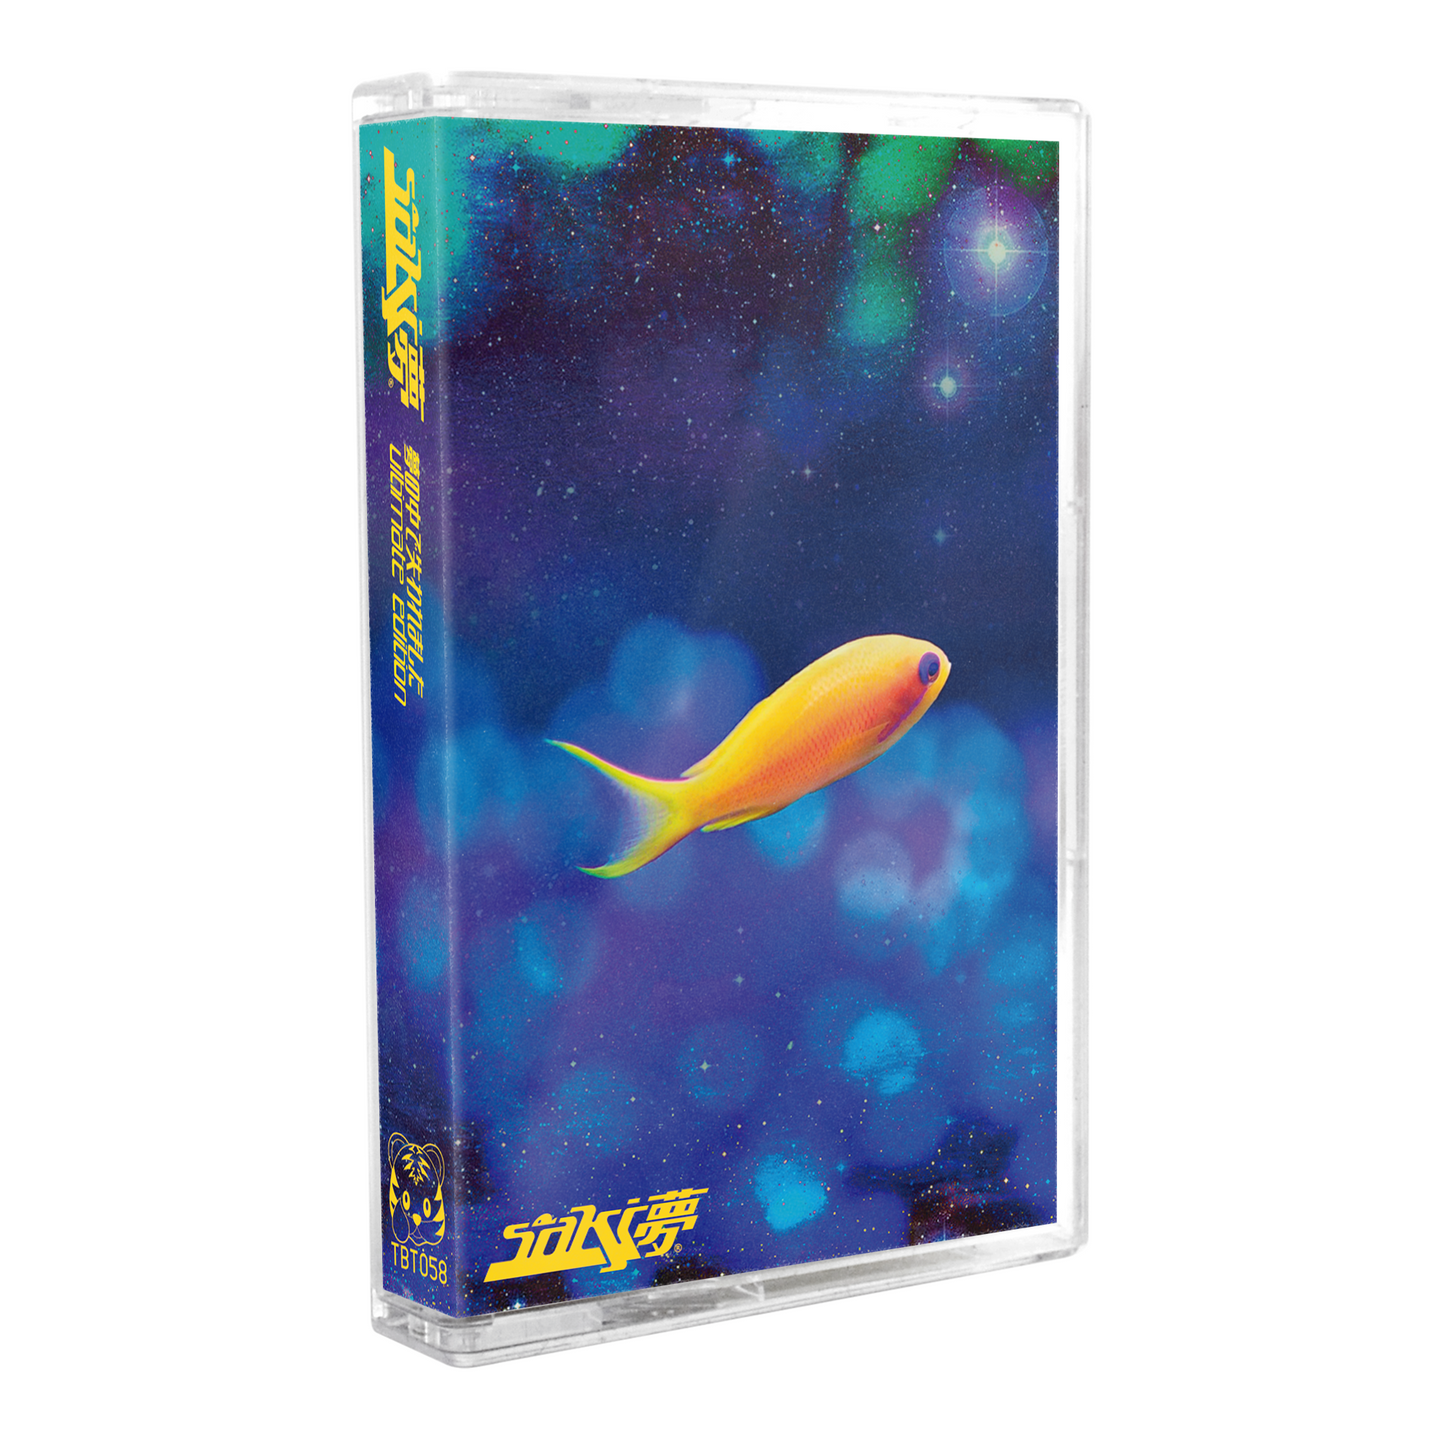 s a k i 夢 - "夢の中で失われました" Limited Edition Cassette Tape